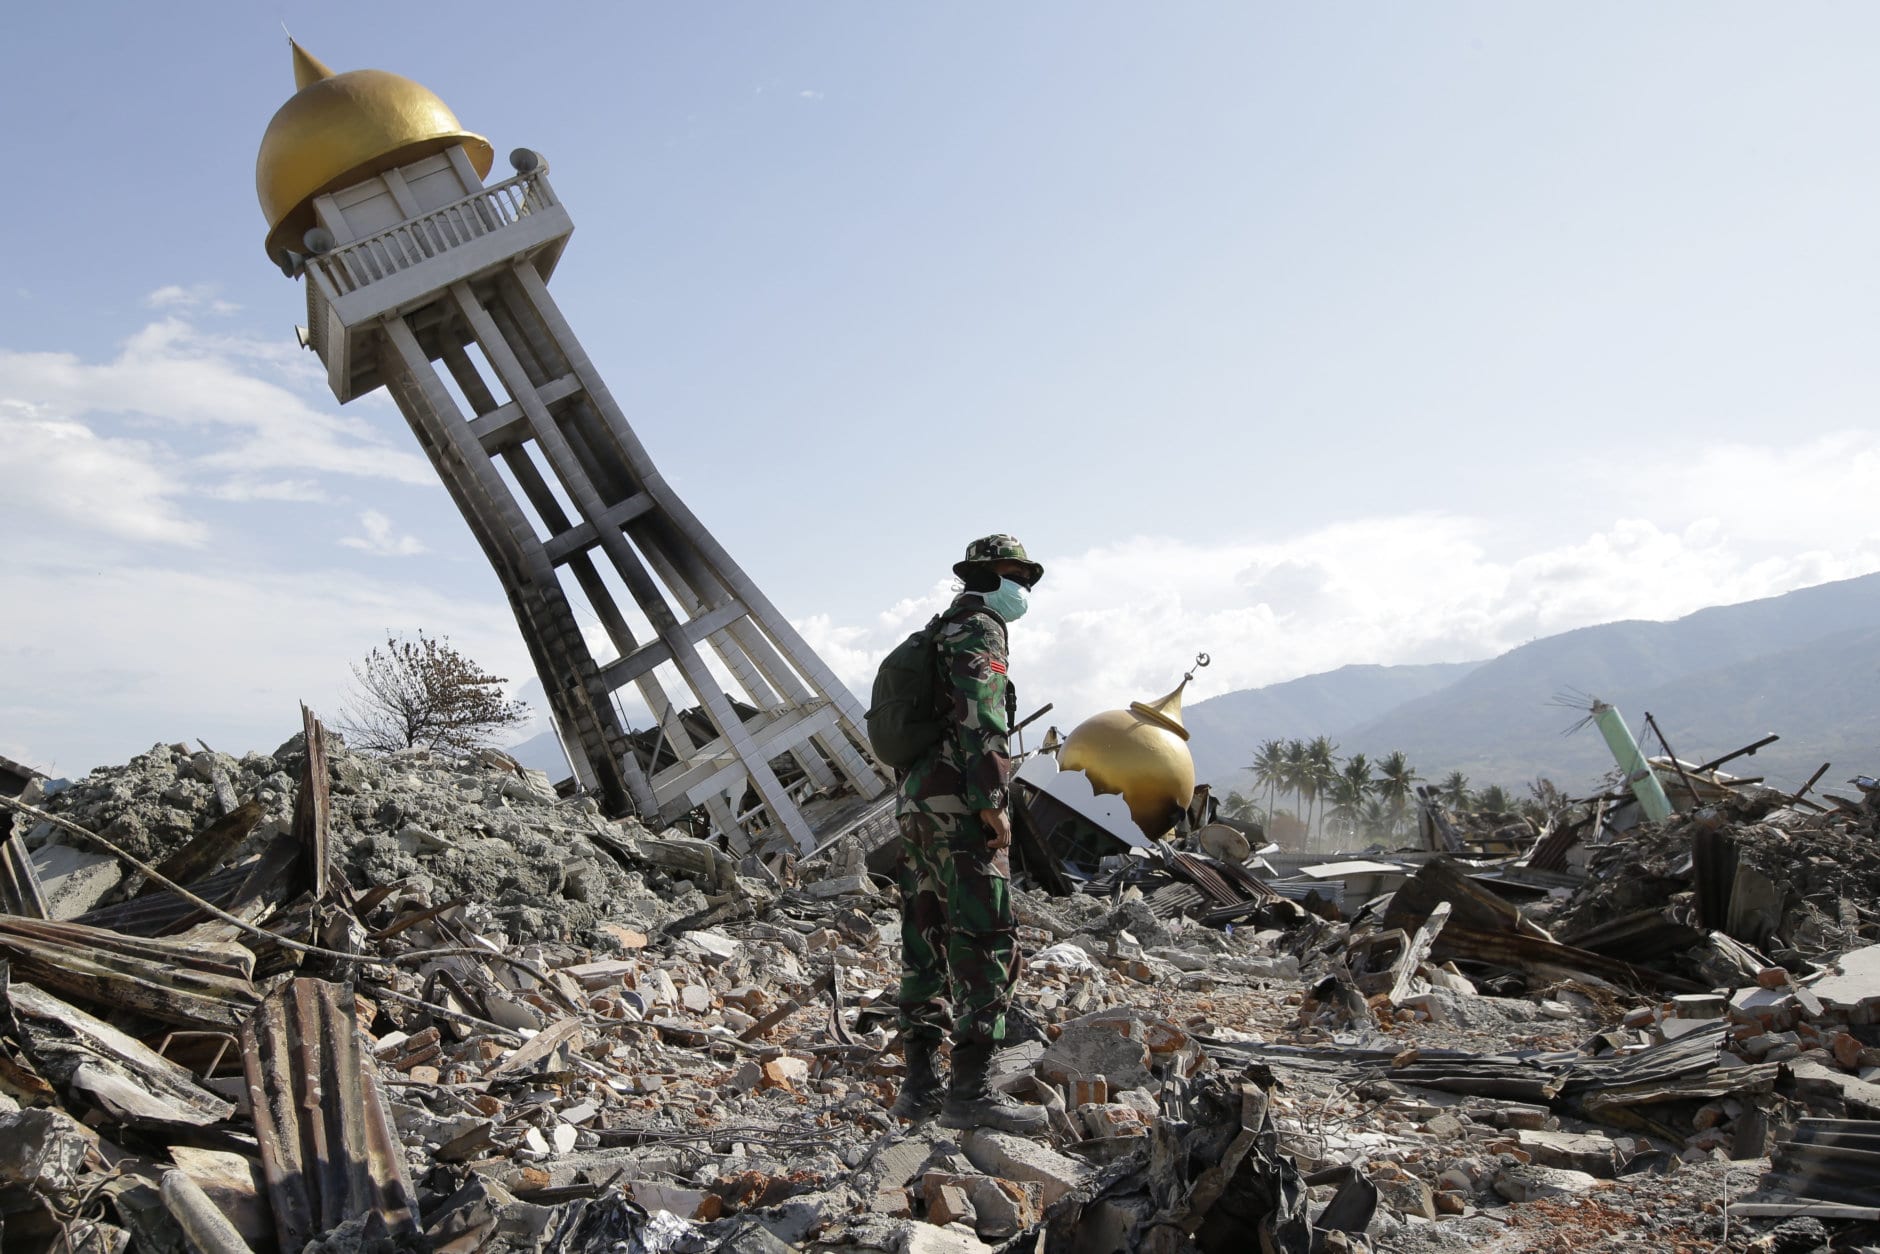 An Indonesian trooper stands beside a toppled mosque as recovery efforts continue at the earthquake-hit Balaroa neighborhood in Palu, Central Sulawesi, Indonesia, on Oct. 6, 2018. (AP Photo/Aaron Favila)